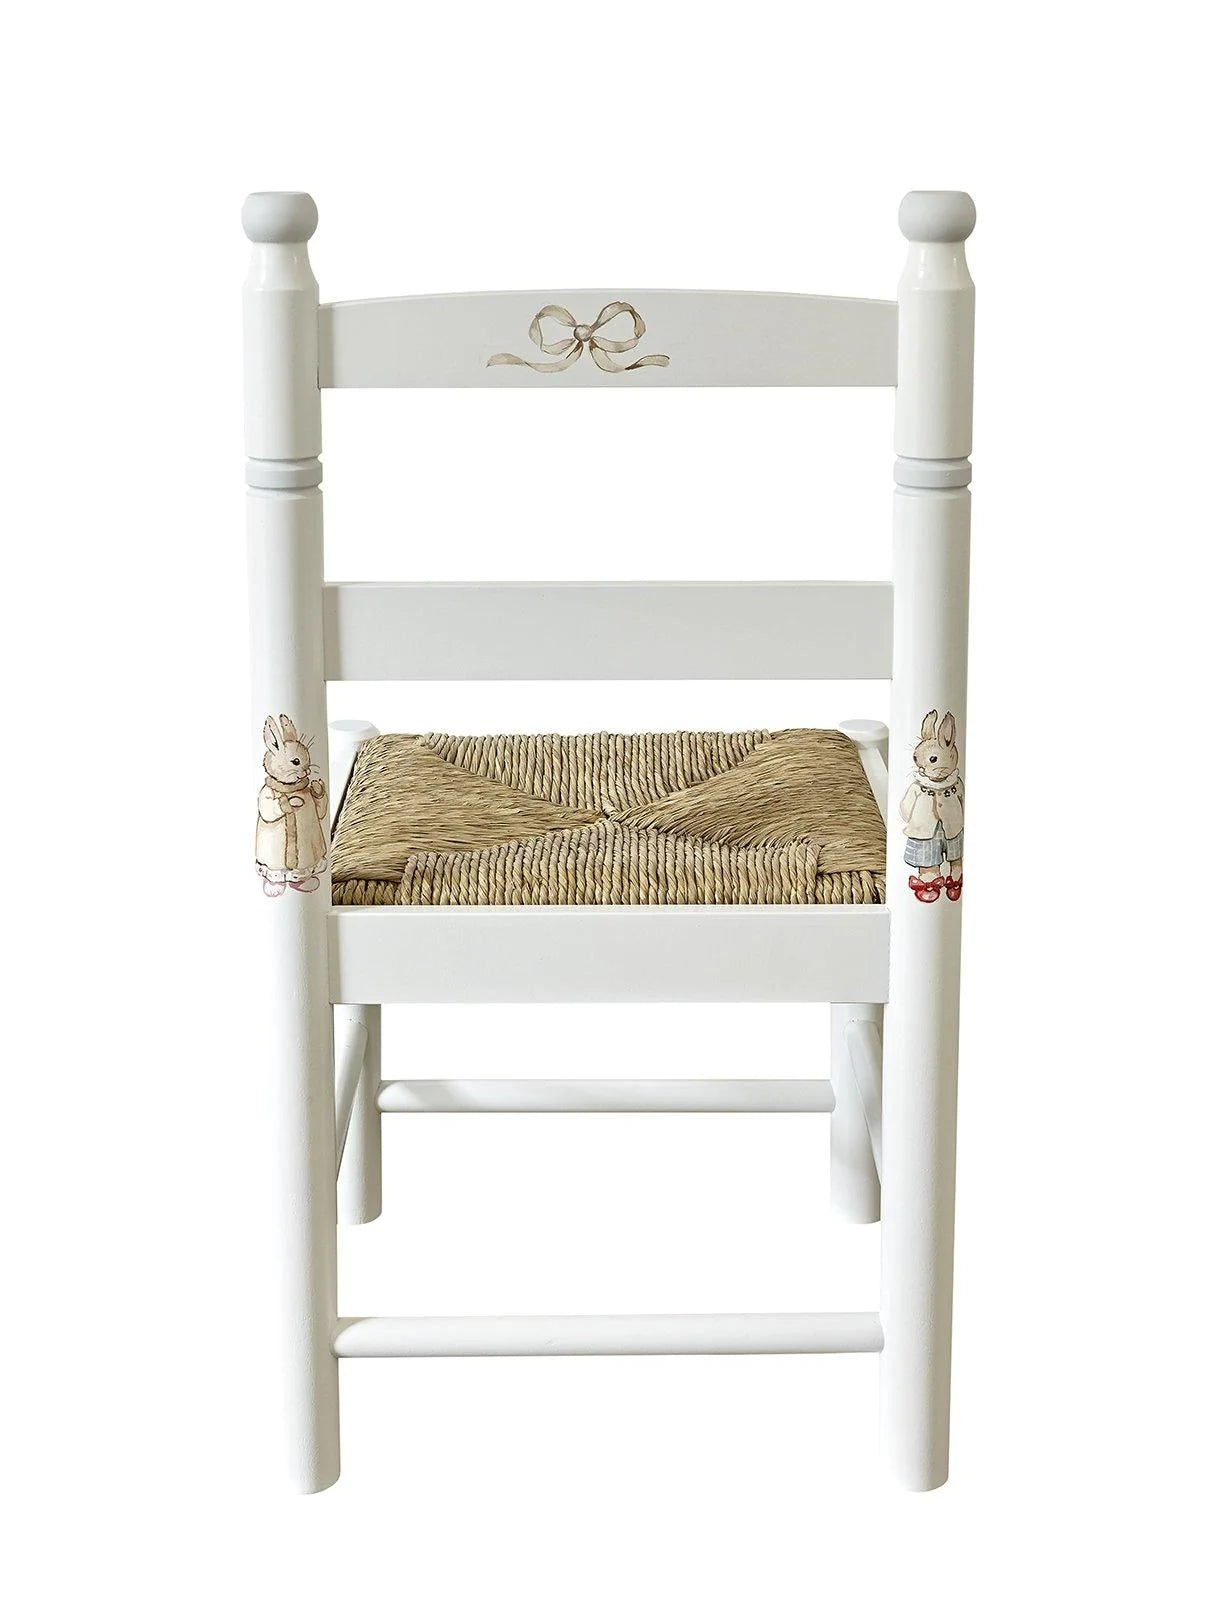 Dragons Rush Seated Chair - Designer Bunnies with Chic Grey Trim